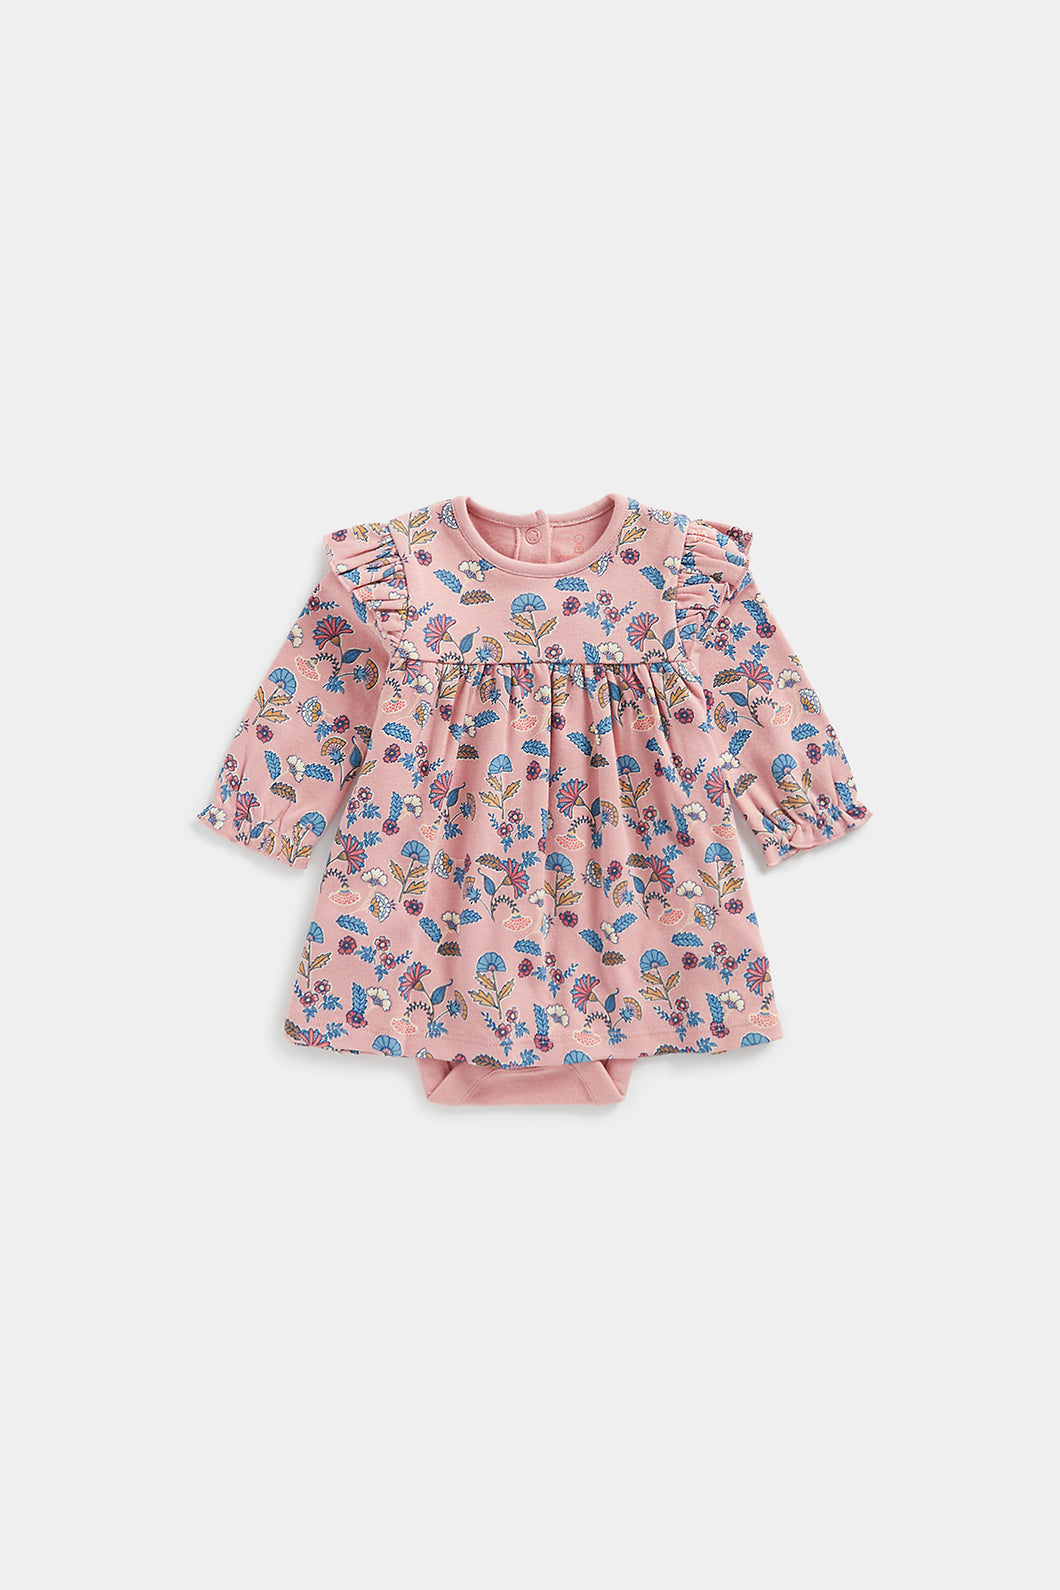 Mothercare Floral Frill Romper Dress